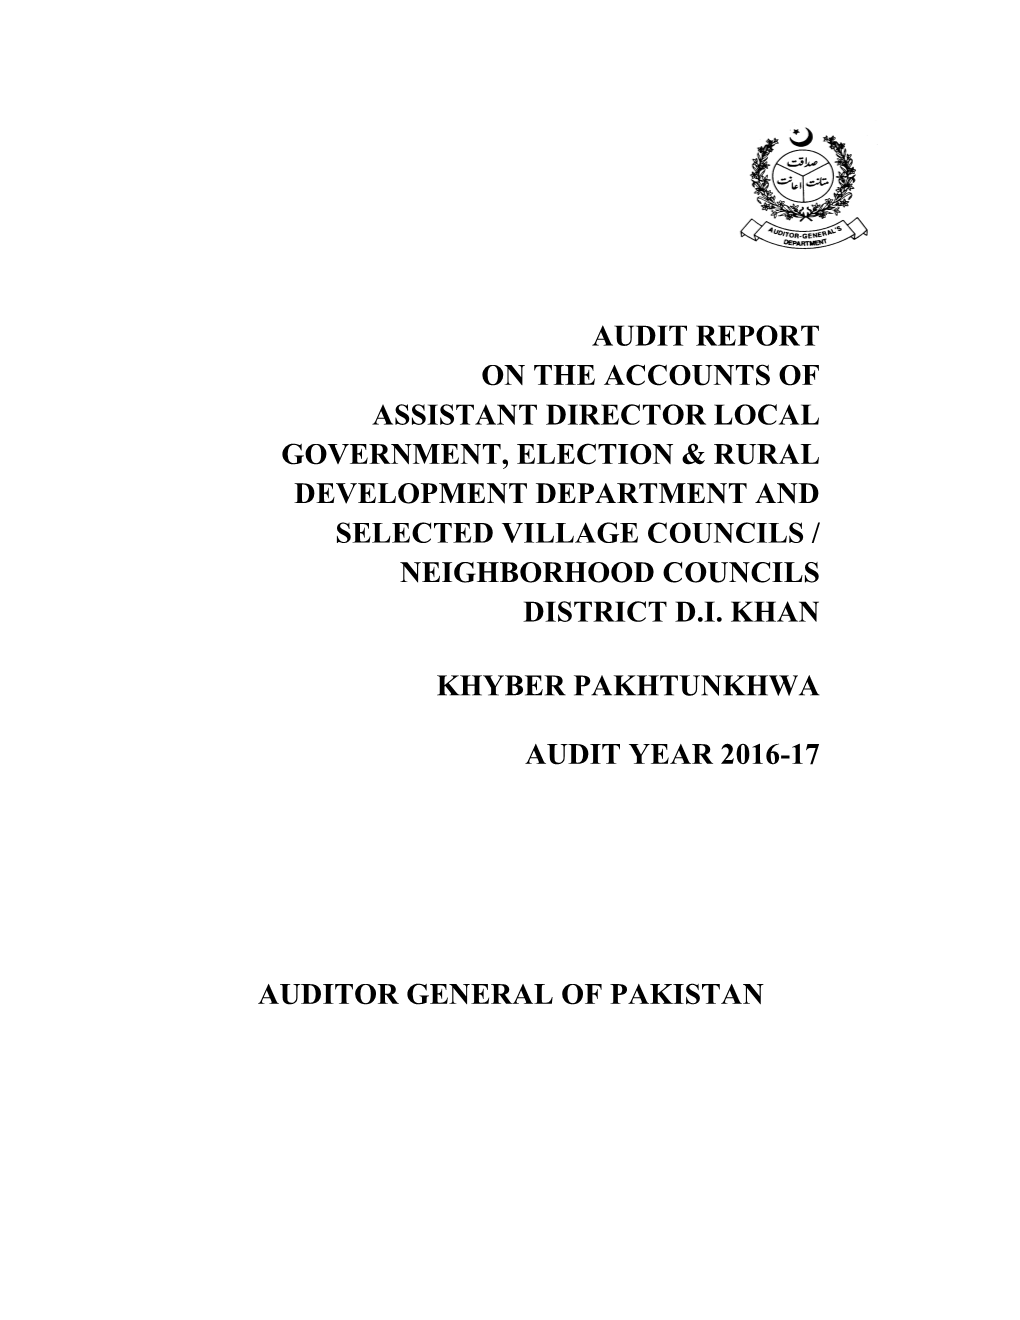 Audit Report on the Accounts of Assistant Director